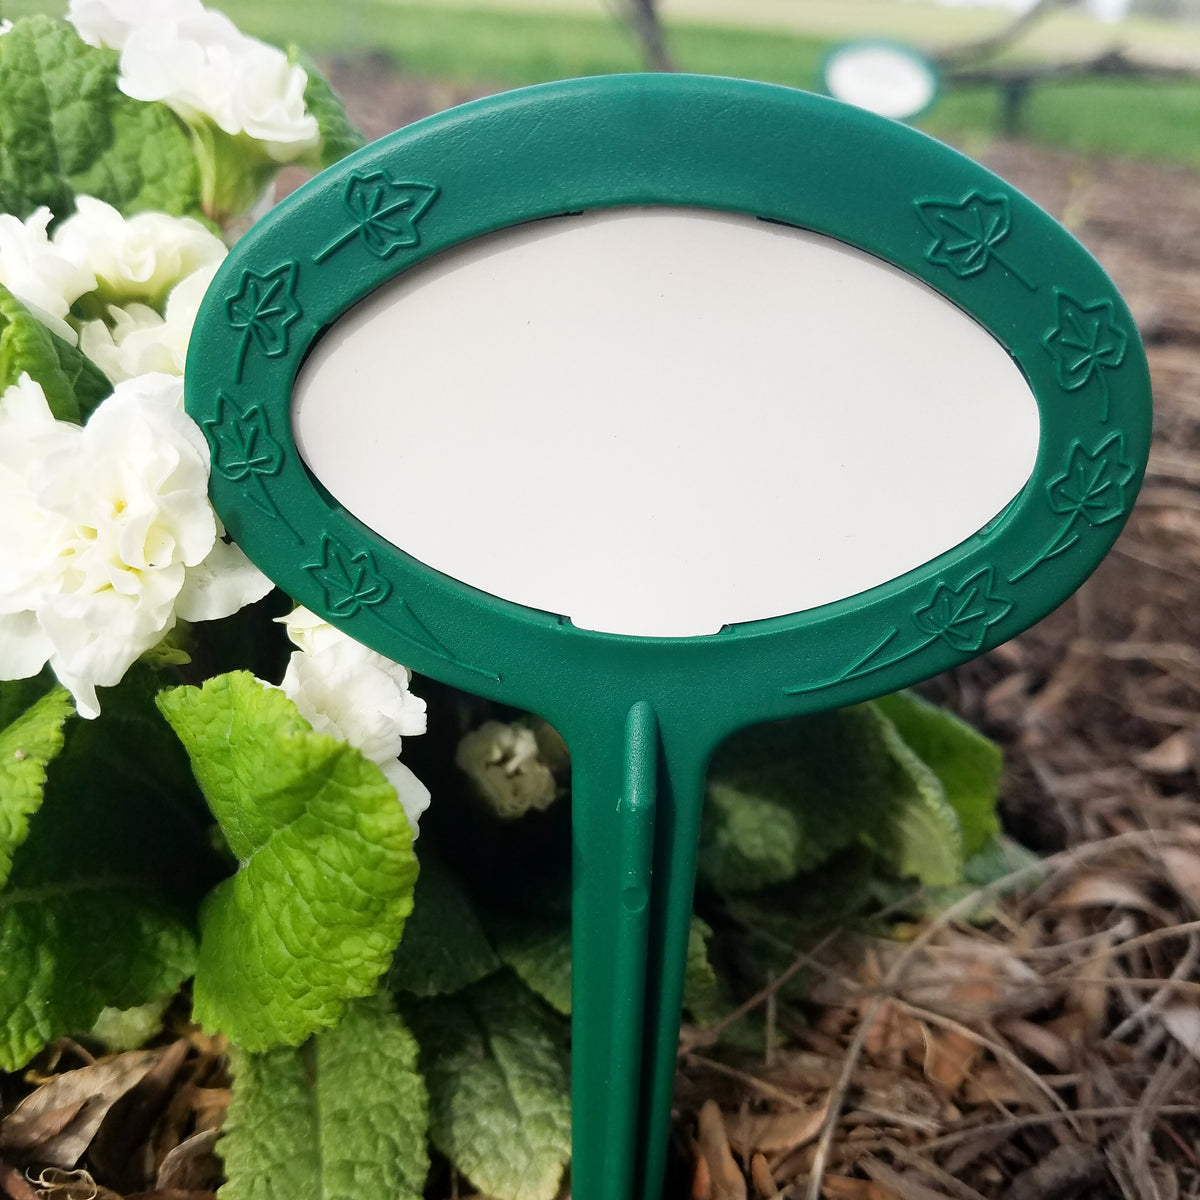 Garden marker  long lasting Made in USA. Photo features plant marker by a primrose. 